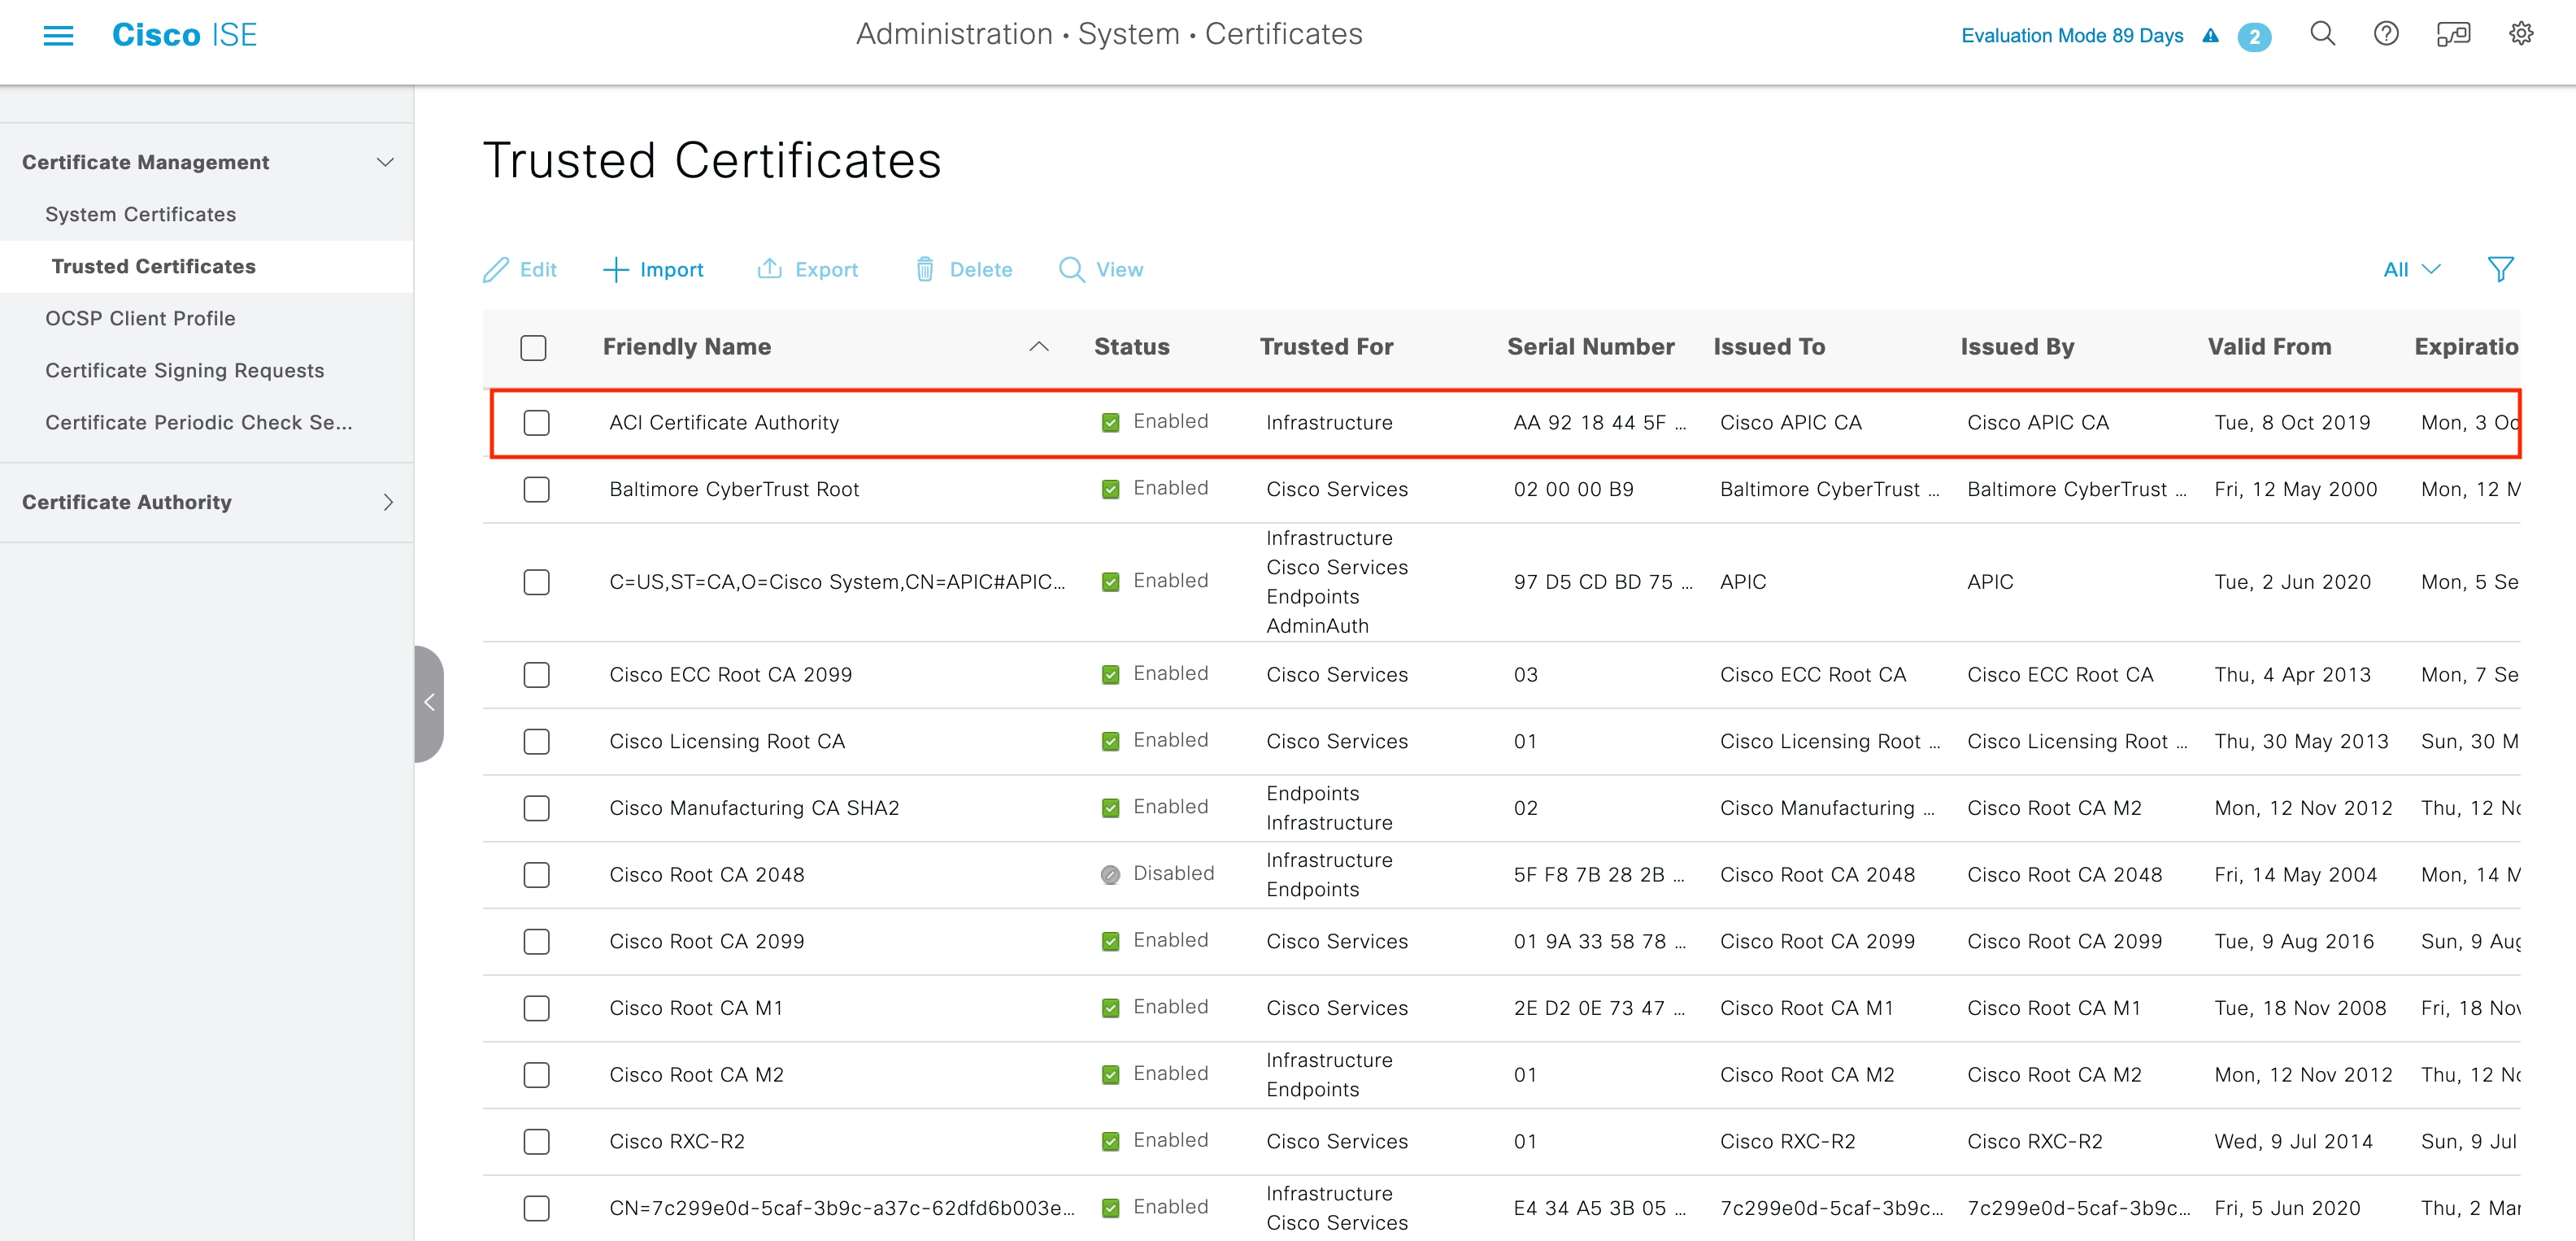 Verify the Certificate in Trusted Certificates window